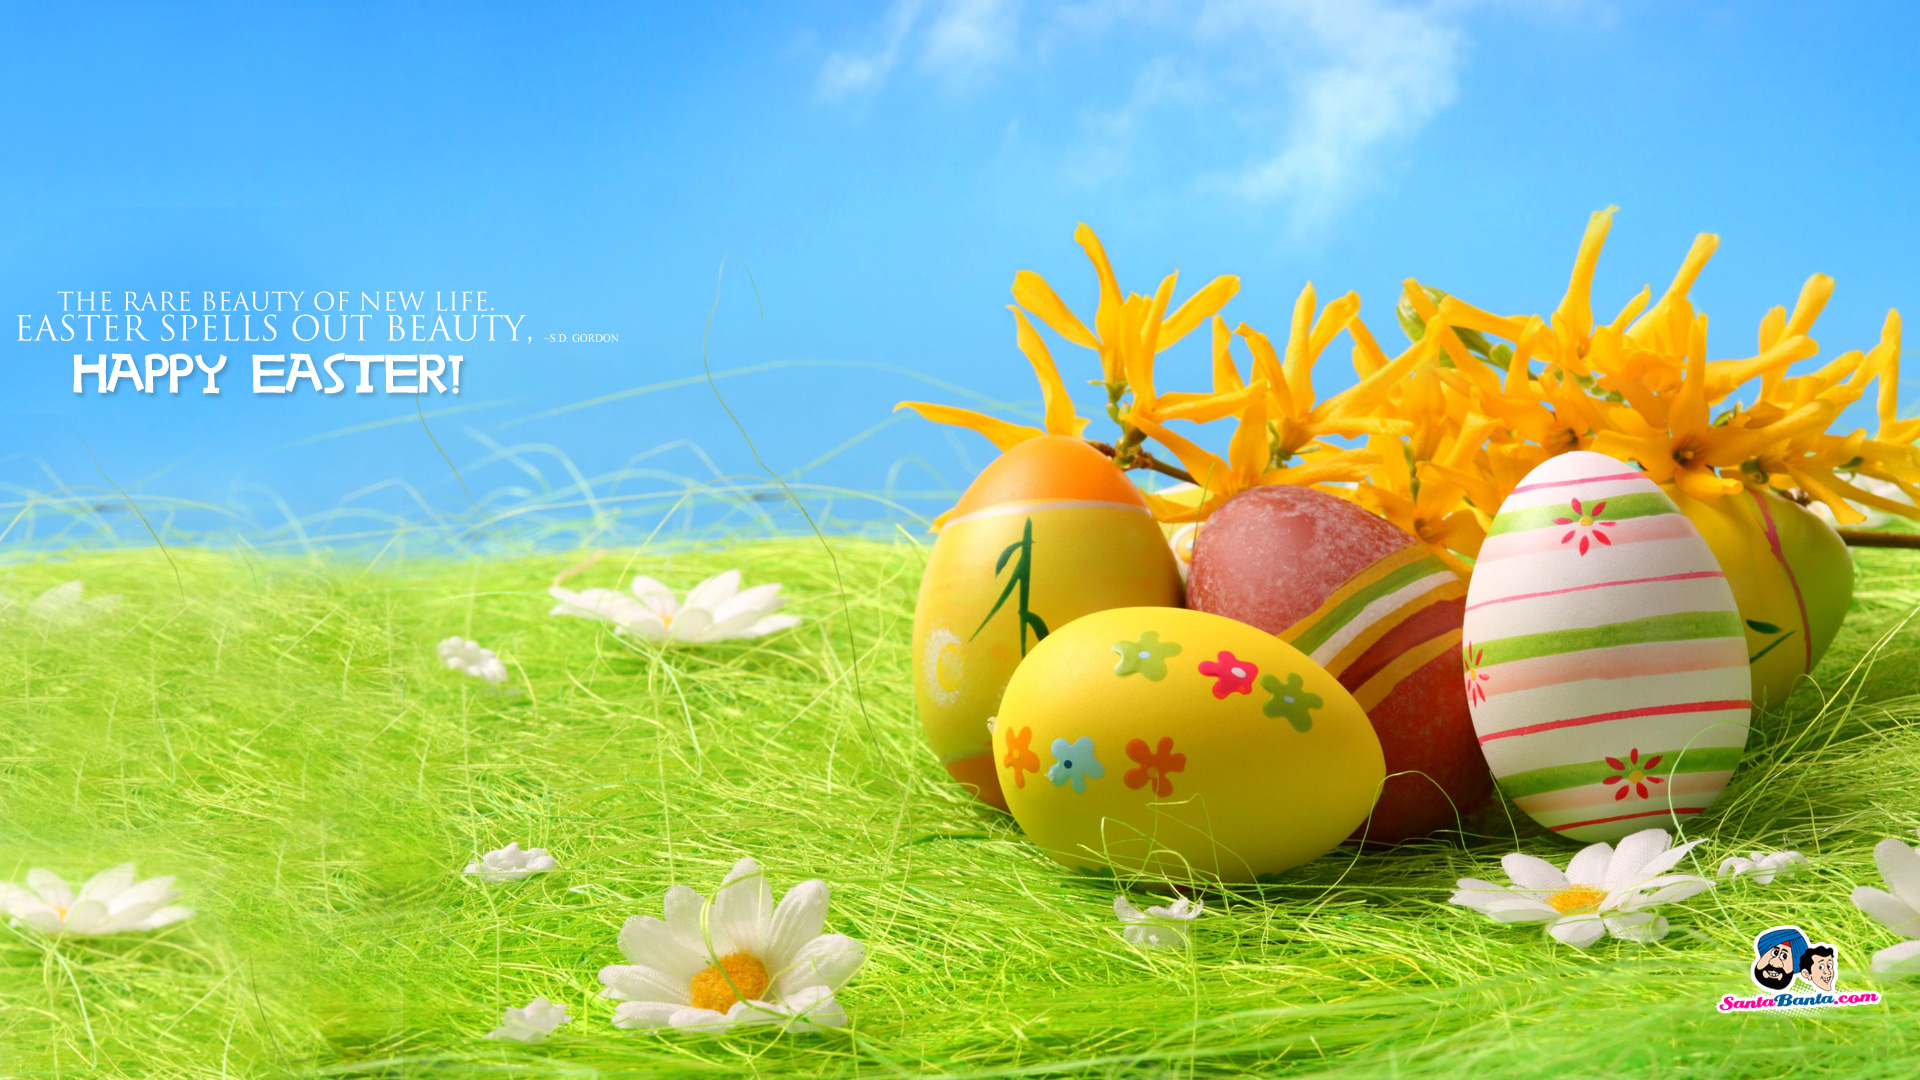 Free download Happy Easter Wallpapers For Desktop [1920x1080] for your